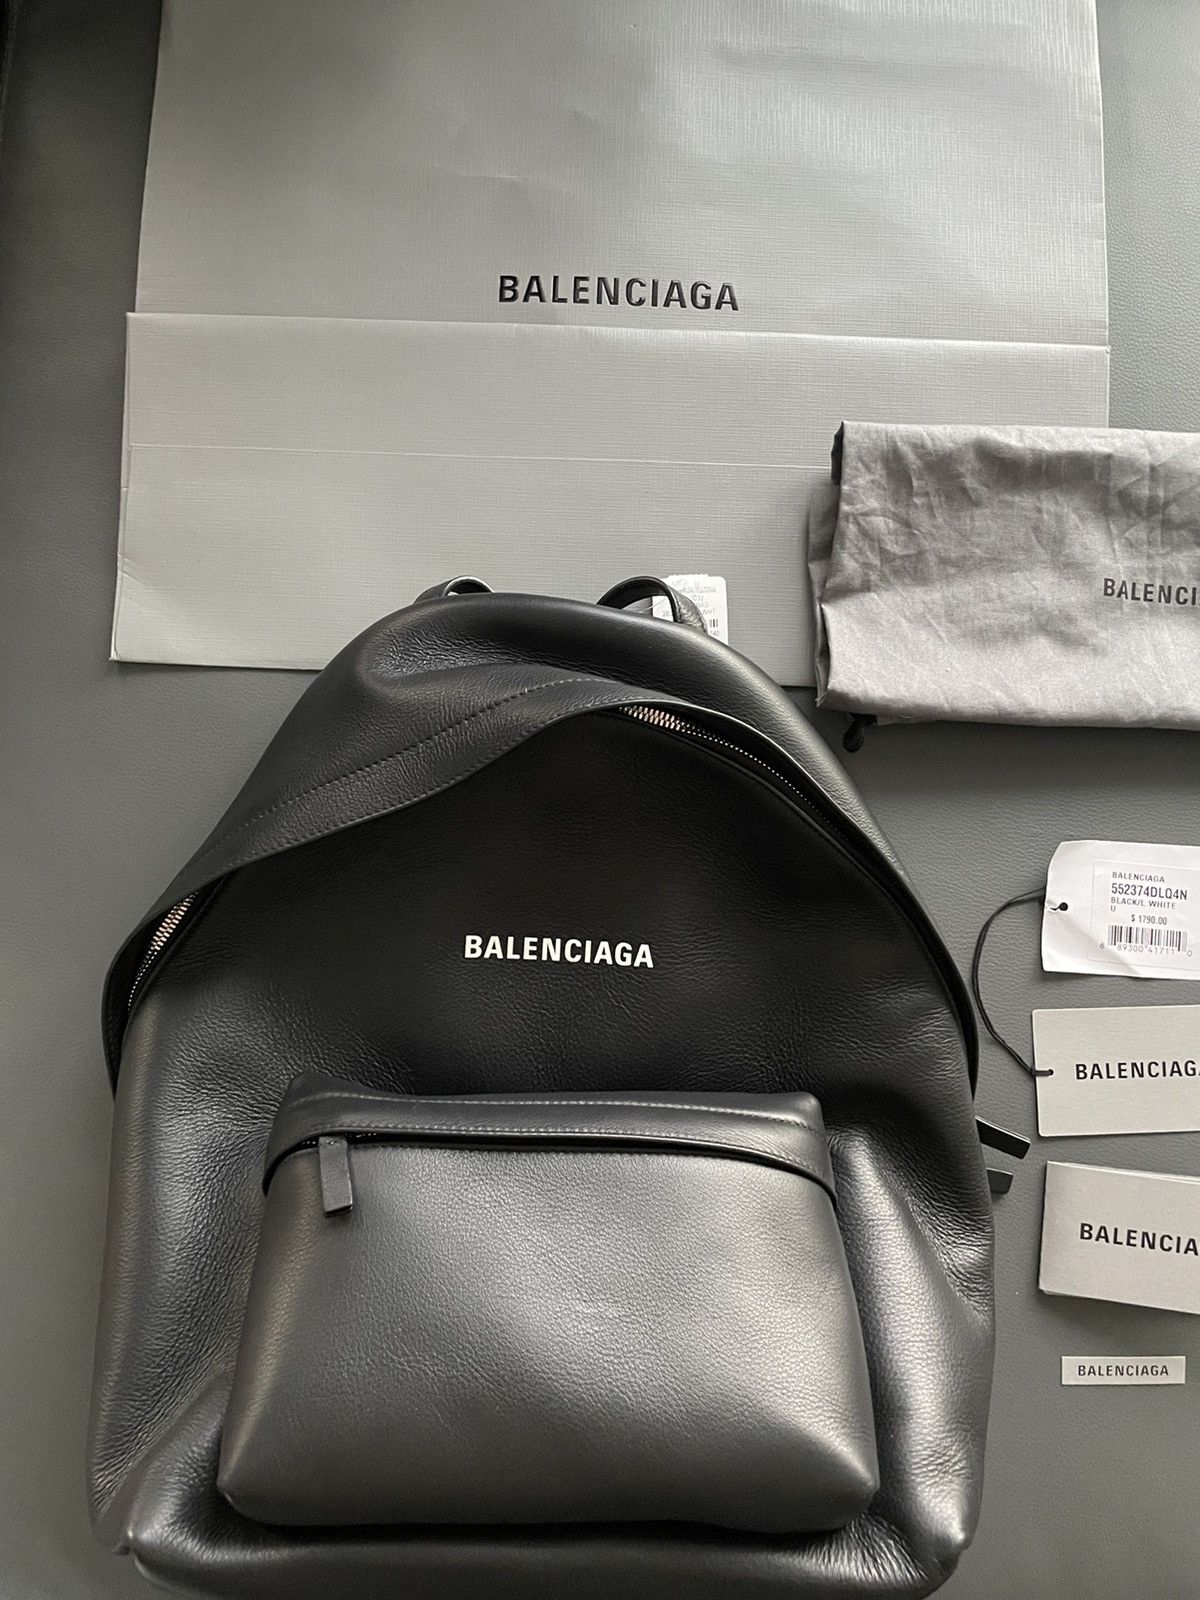 People Think Balenciaga Is Trolling Us With a $2K Trash Pouch in